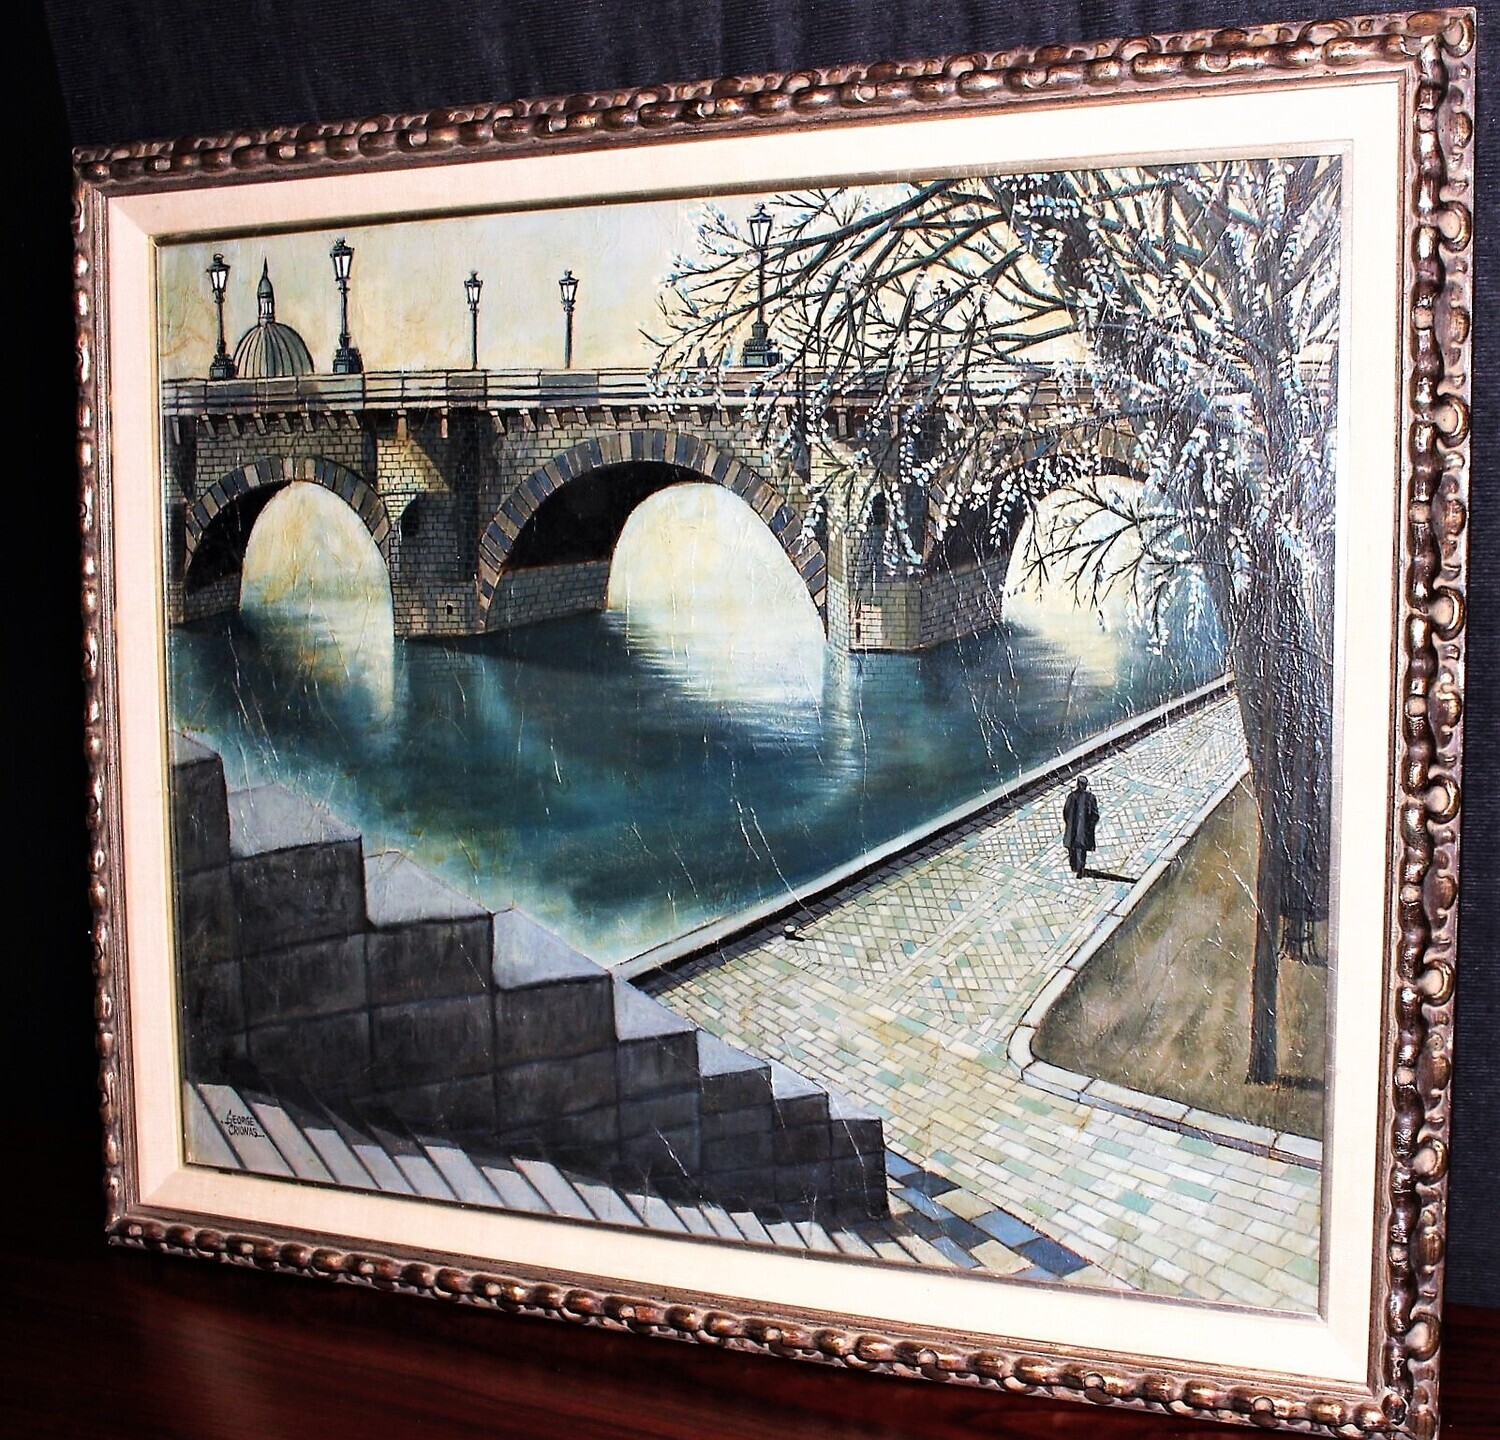 Original George Crionas Embankment Framed 35 x 24 Oil on Canvas Painting, Signed